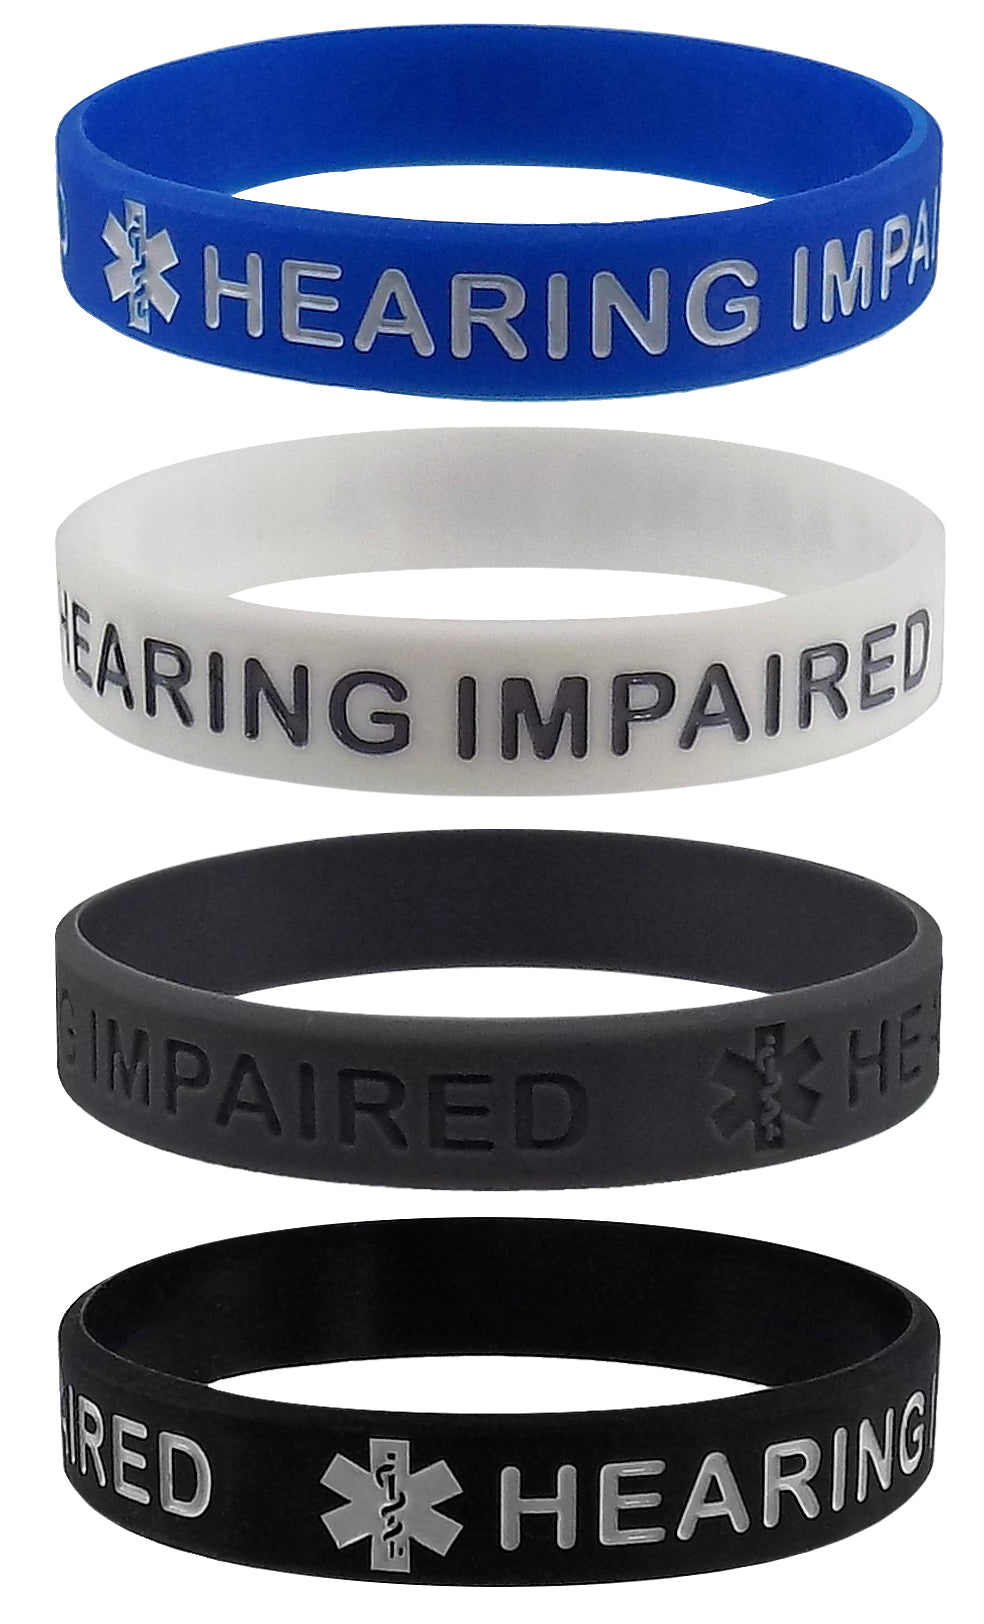 "HEARING IMPAIRED" Medical Alert ID Silicone Bracelet Wristbands 4 Pack